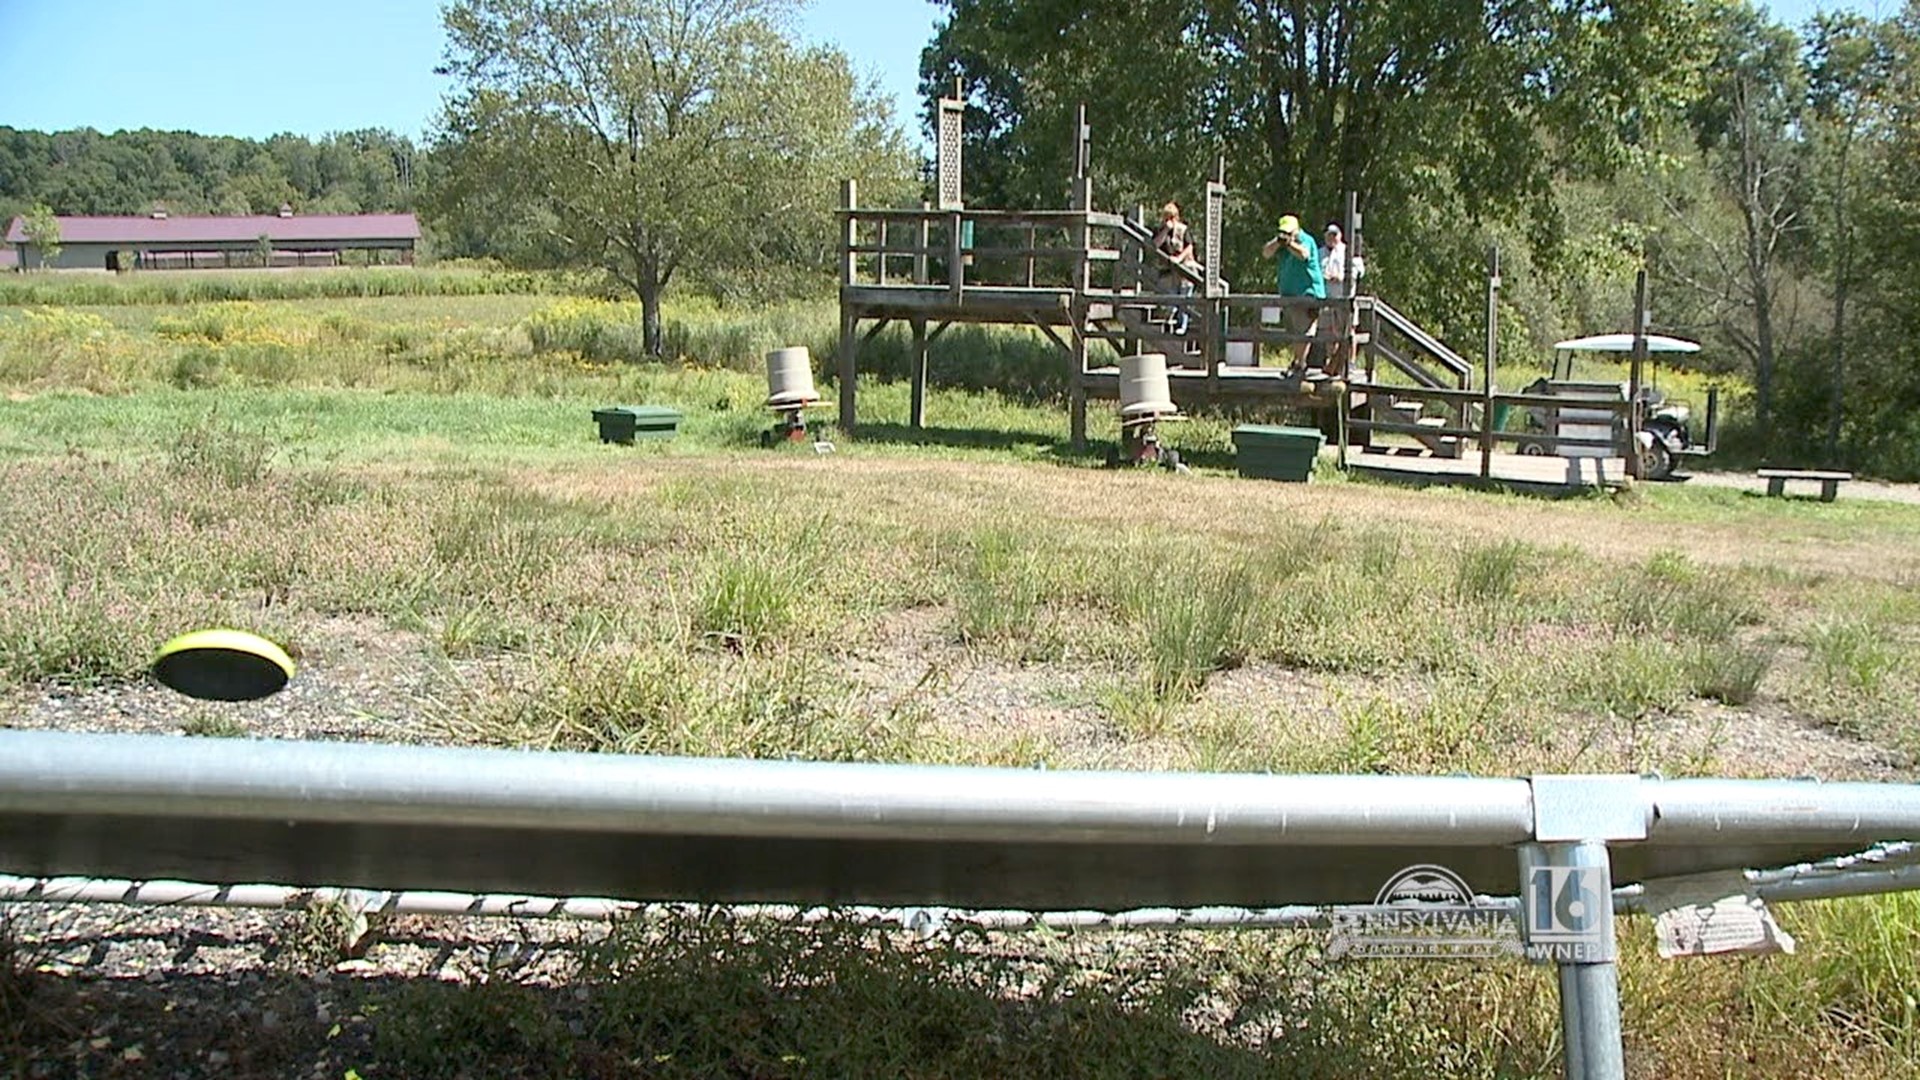 This sporting clays range uses a trampoline!